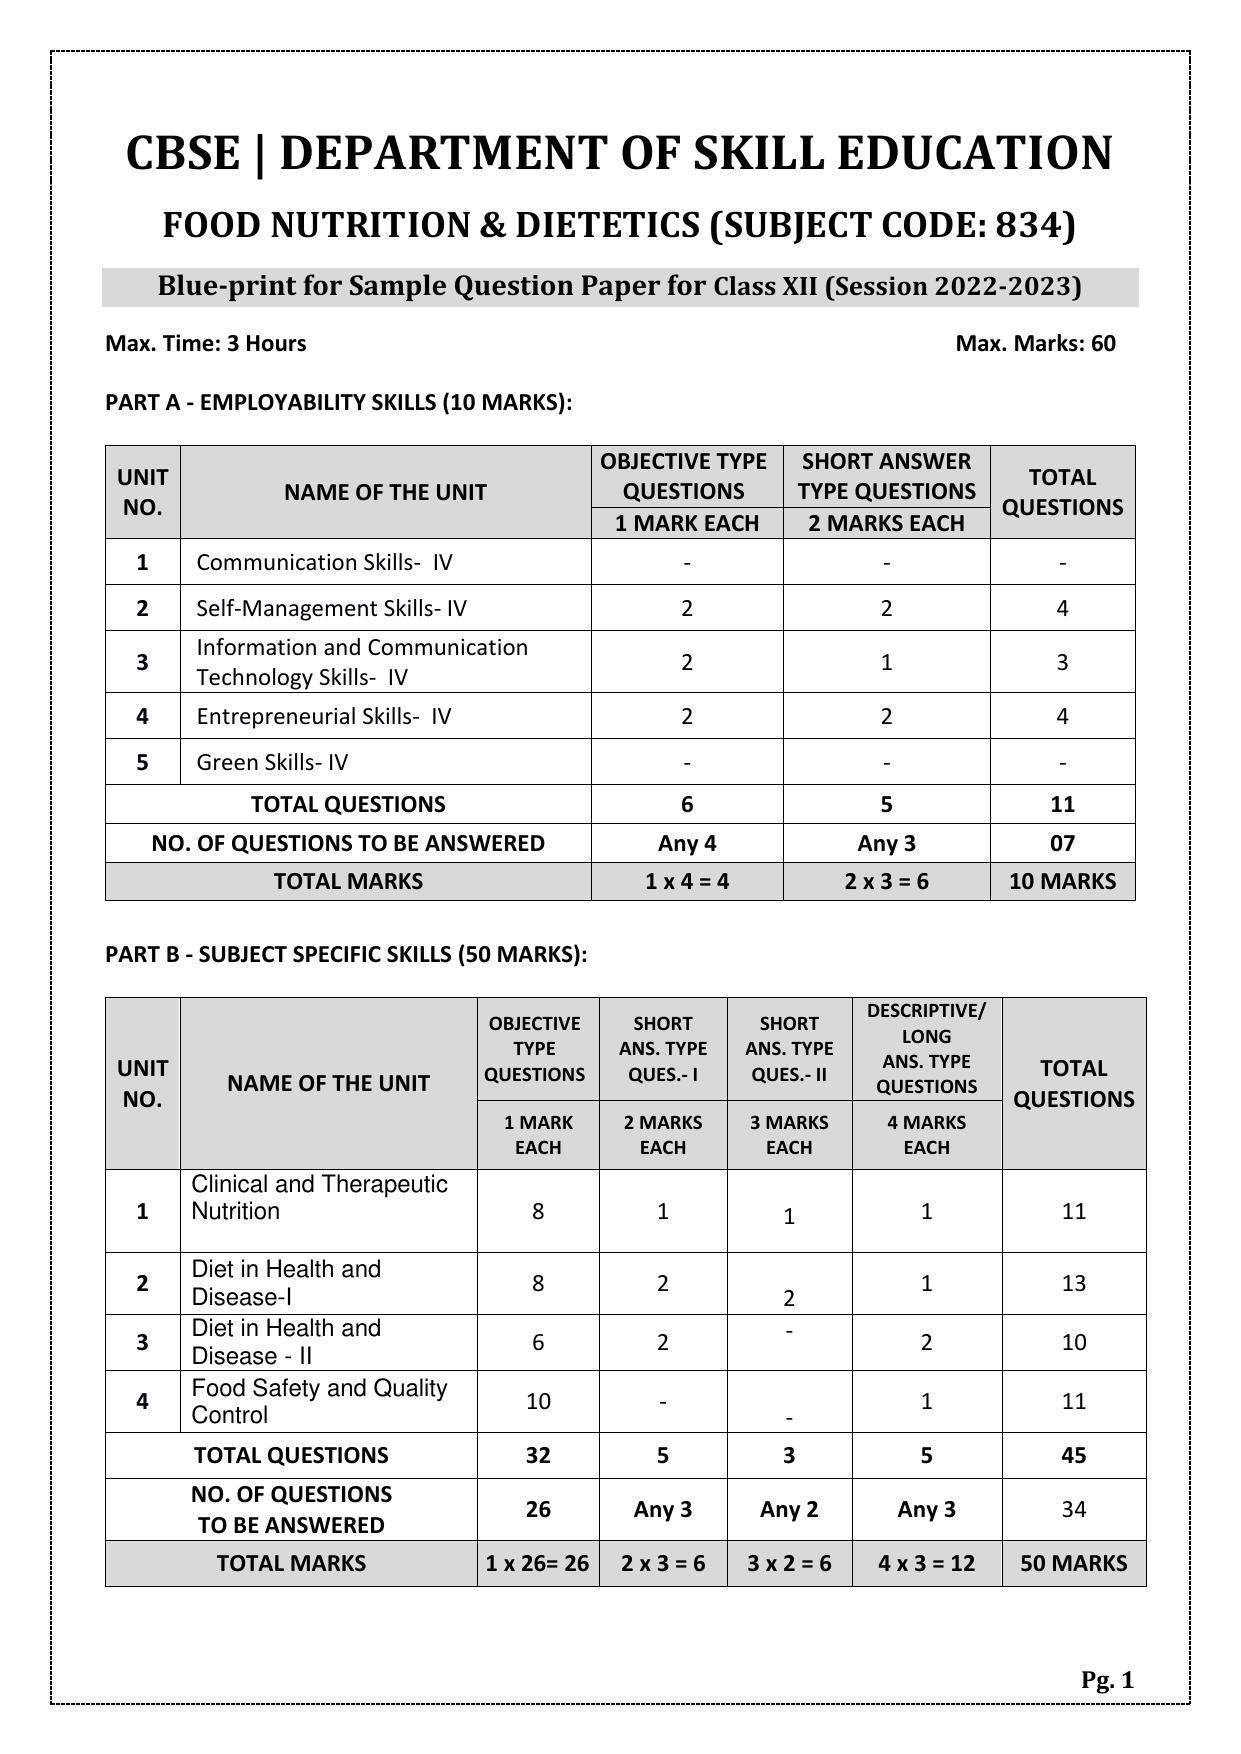 CBSE Class 12 Food Nutrition & Dietetics (Skill Education) Sample Papers 2023 - Page 1